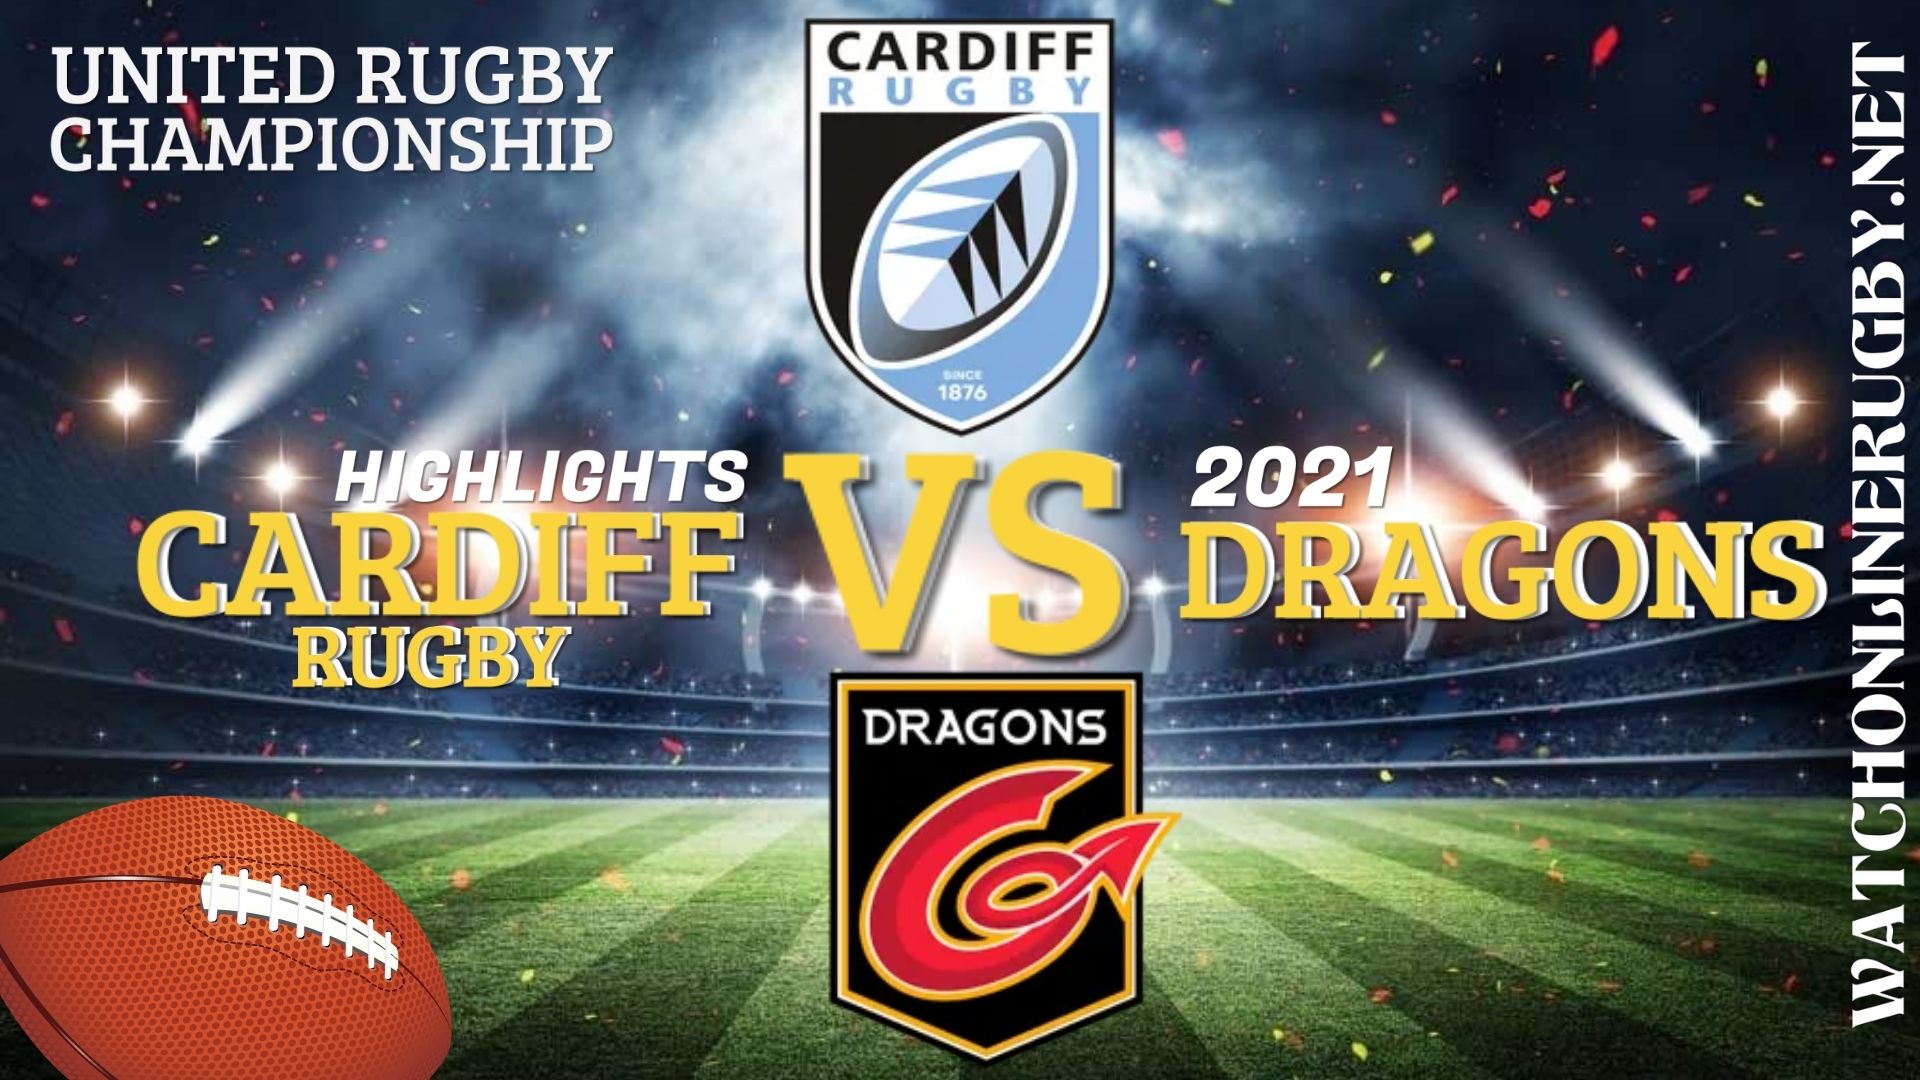 Cardiff Rugby Vs Dragons United Rugby Championship 2021 RD 5